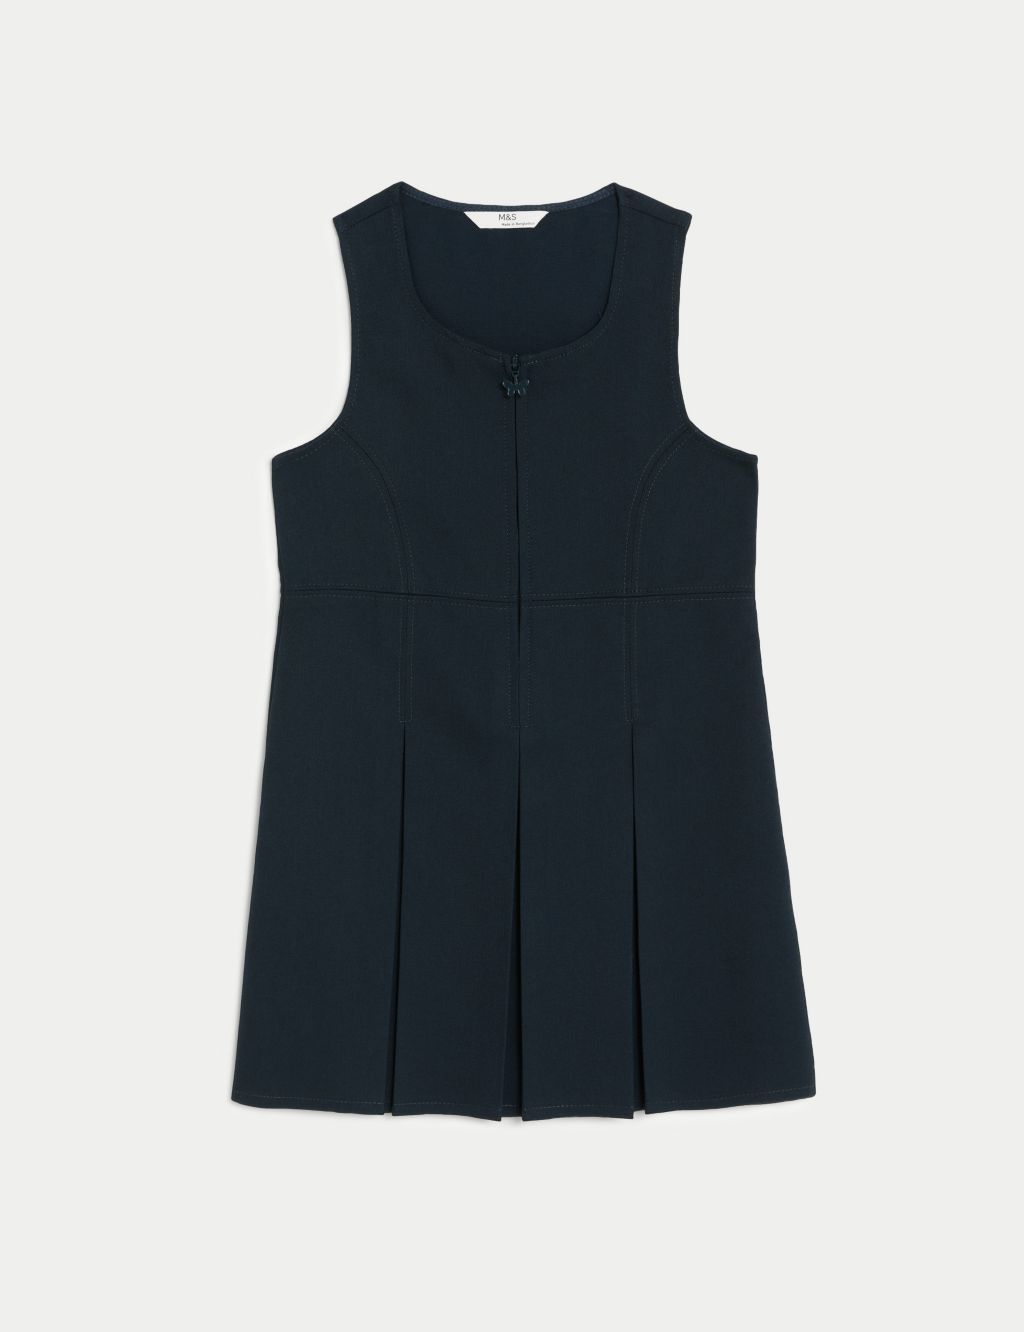 School Girls' Regular Fit Pleated Pinafore (2-16 Yrs) image 1